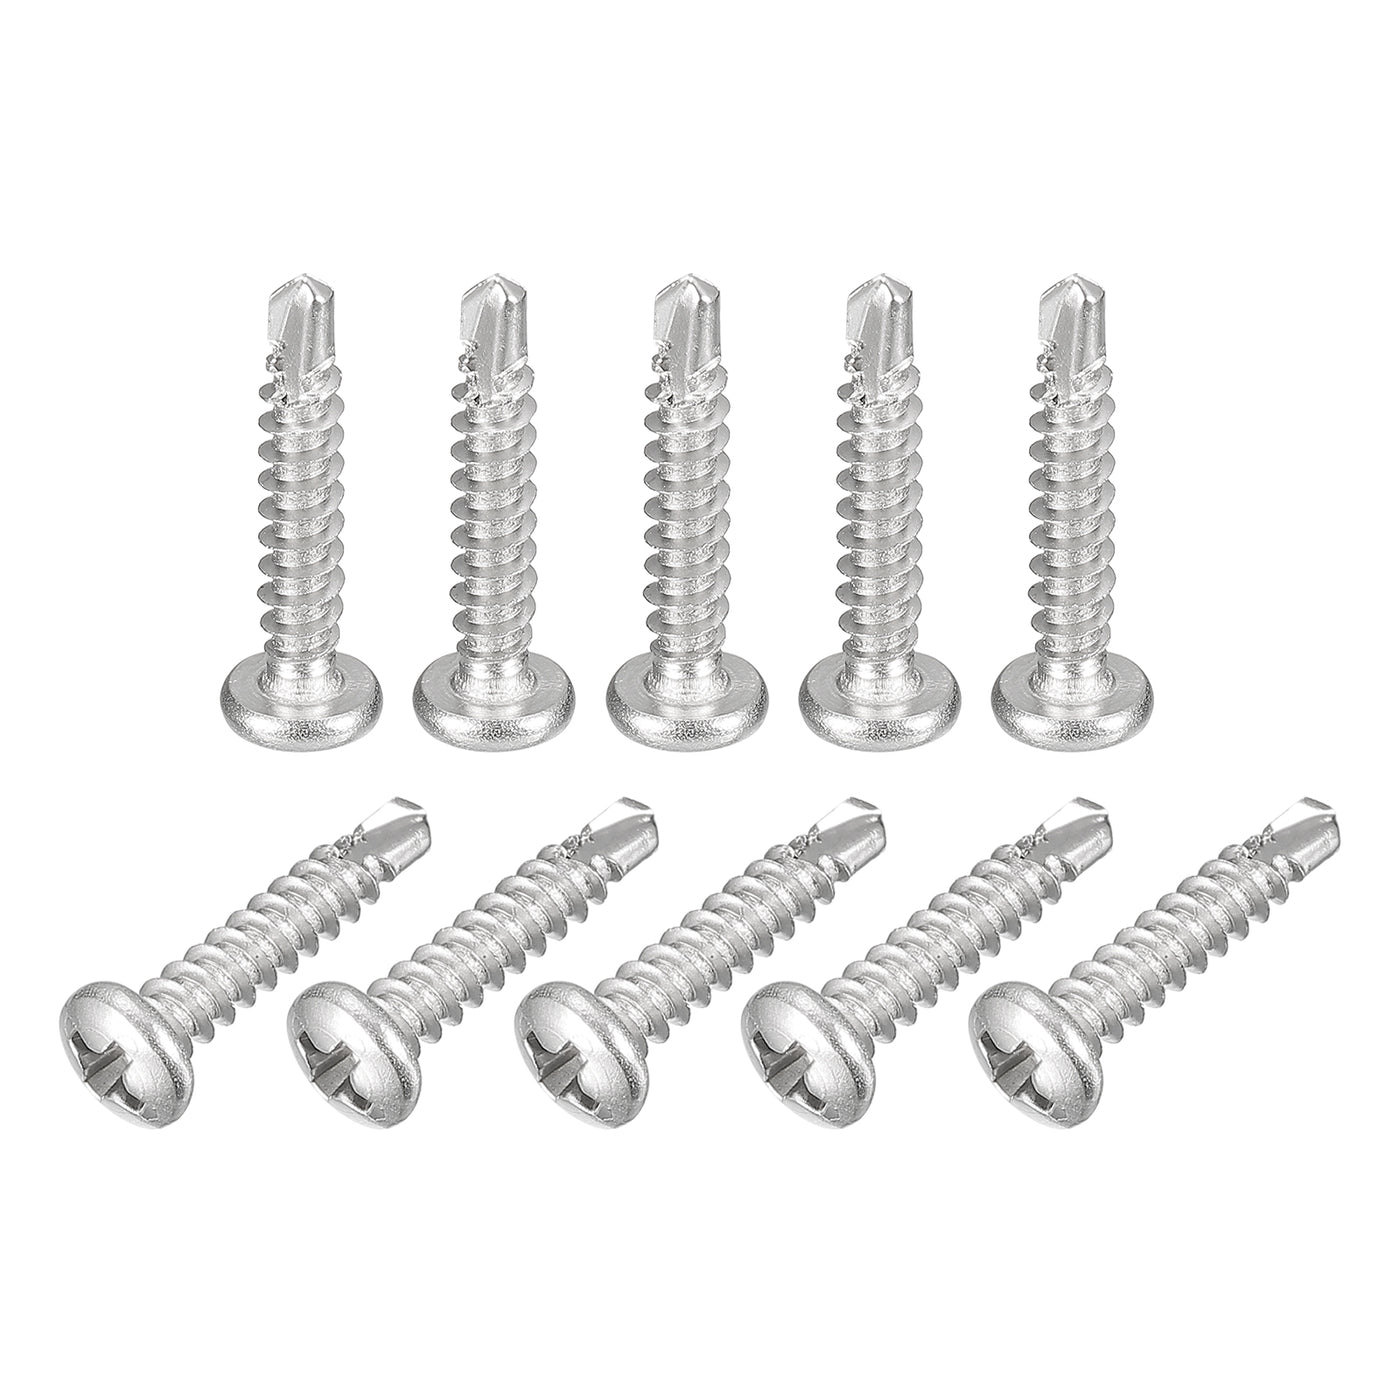 uxcell Uxcell #6 x 3/4" Self Drilling Screws, 50pcs Phillips Pan Head Self Tapping Screws